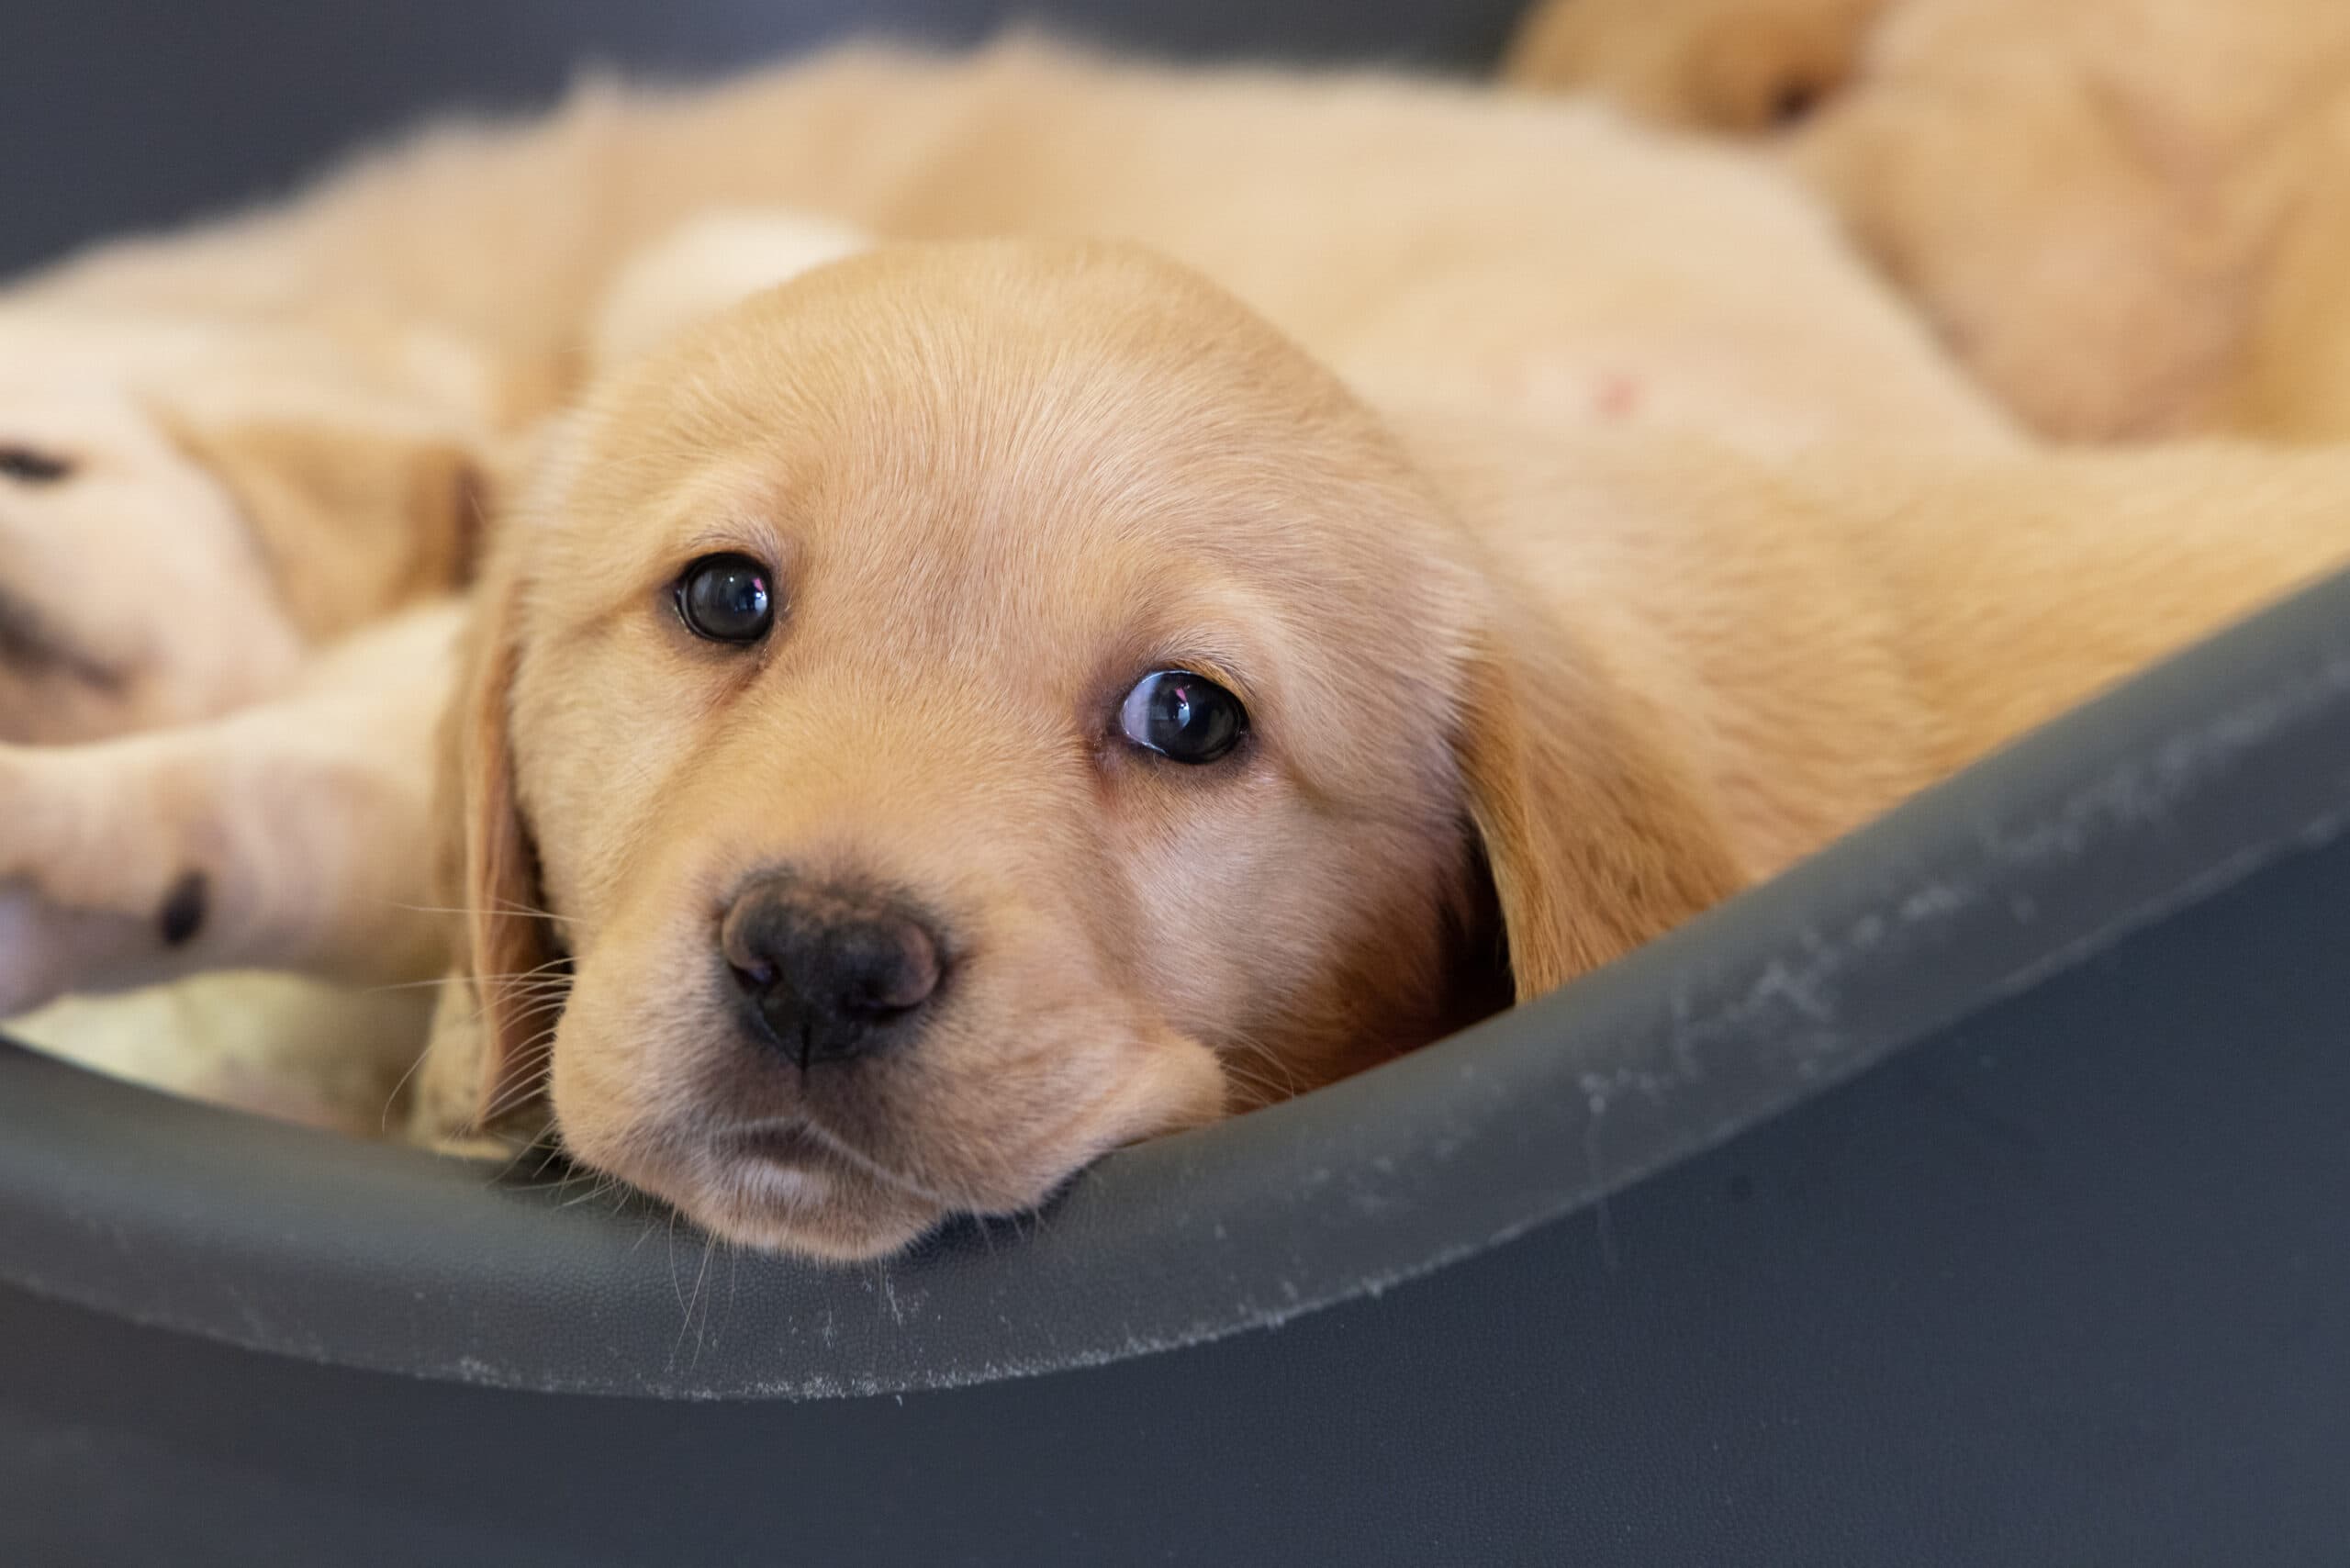 A gorgeous guide dog puppy is snuggled up cosily in bed with its brothers and sisters.